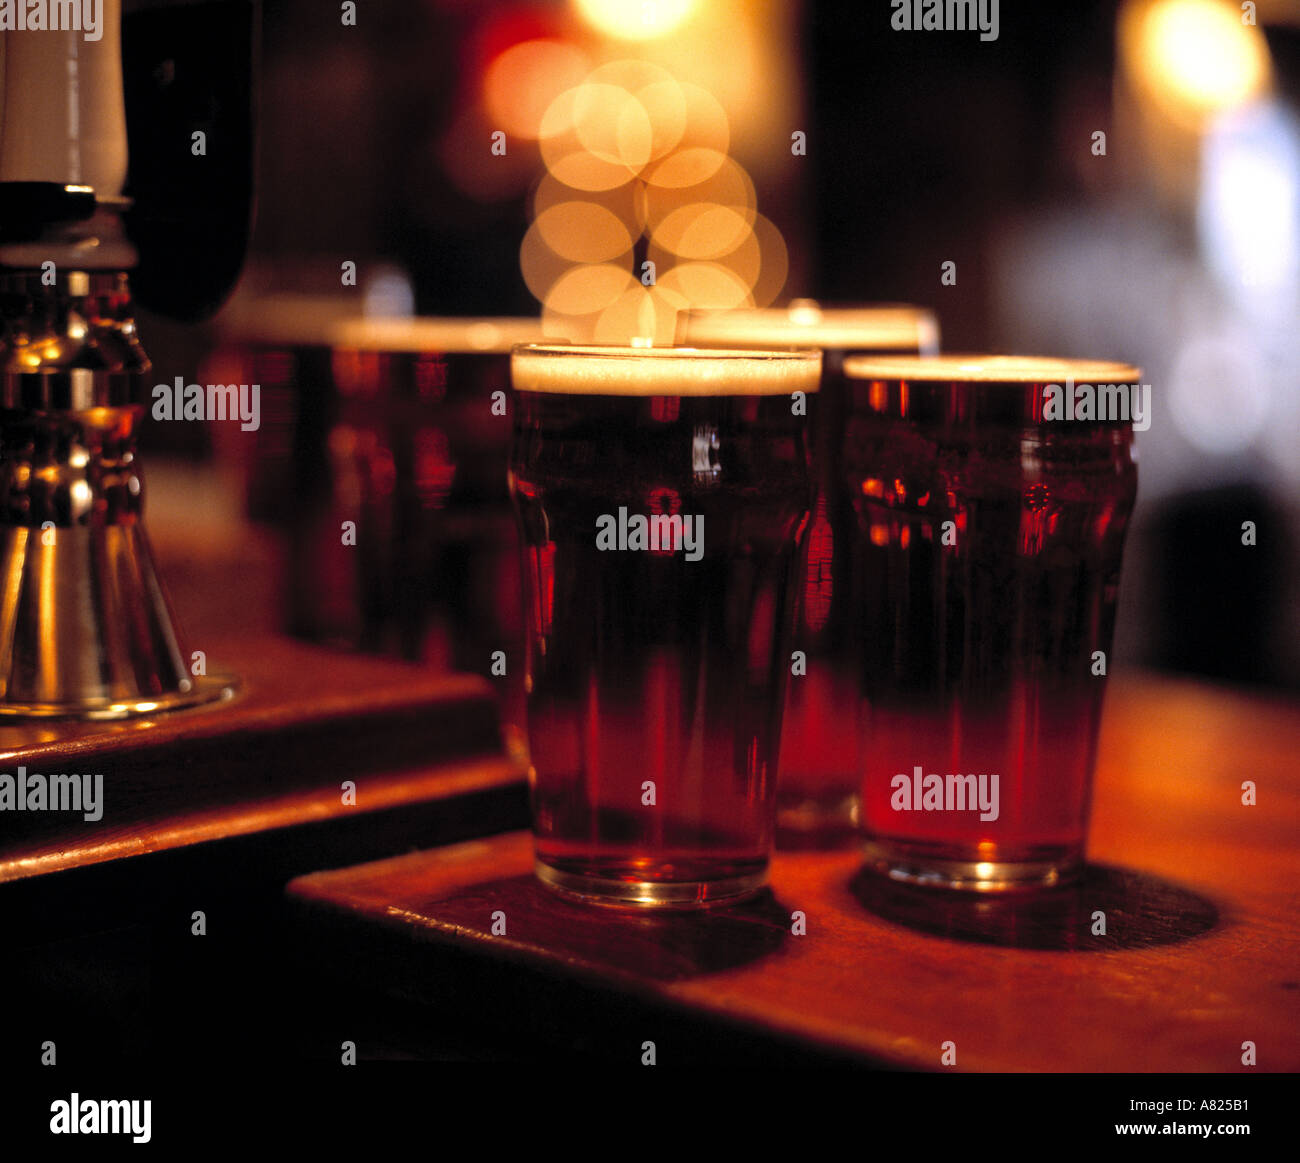 pints of beer on bar Stock Photo